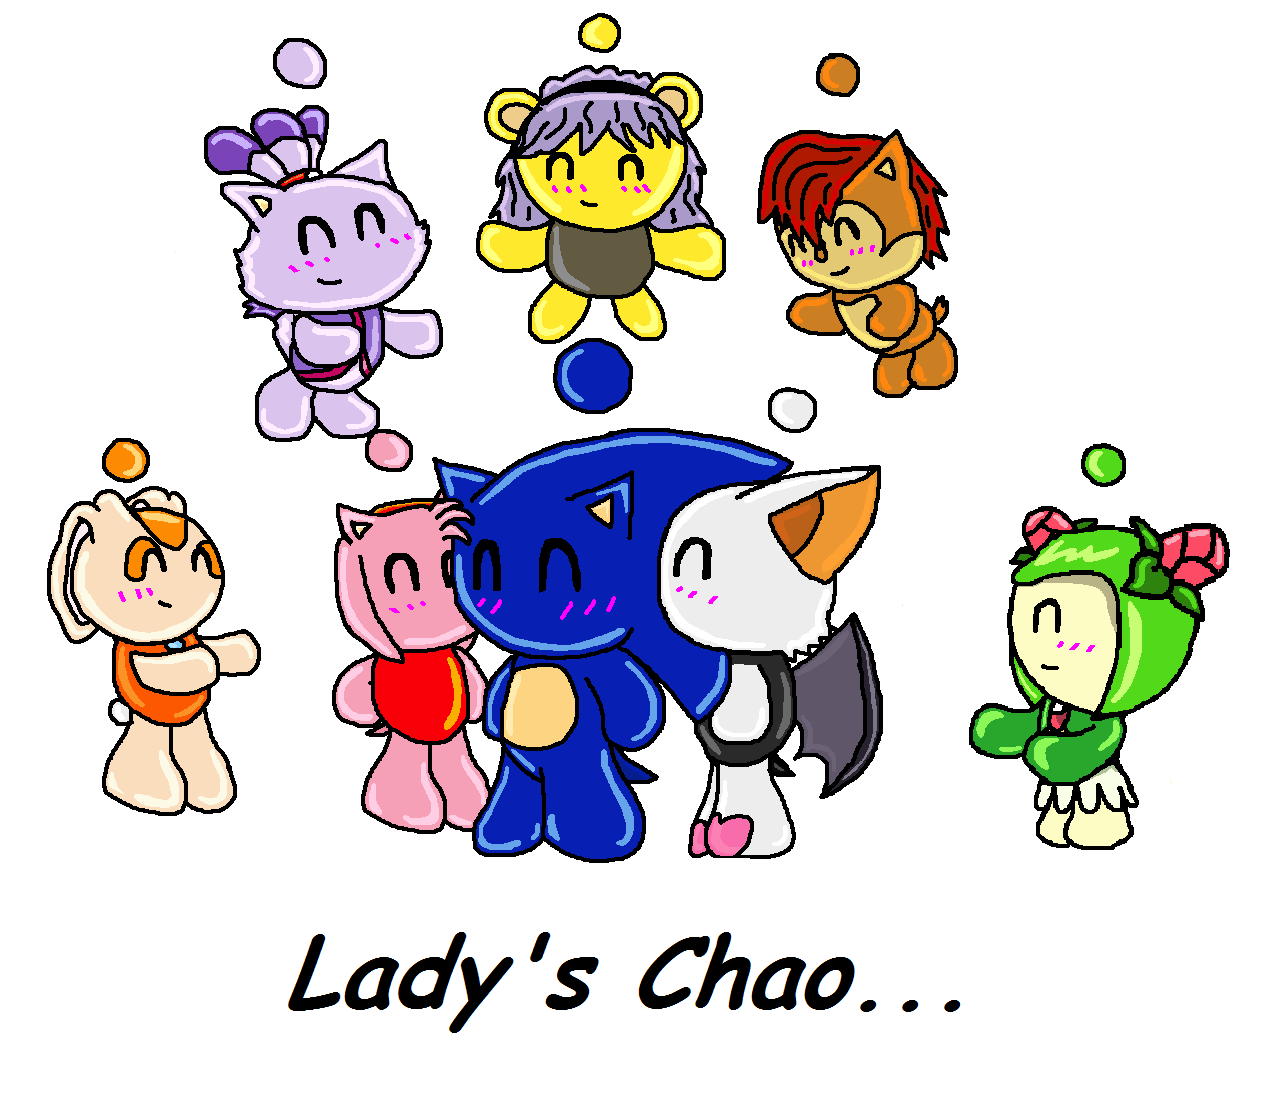 Lady's Chao by ChrissieGirl